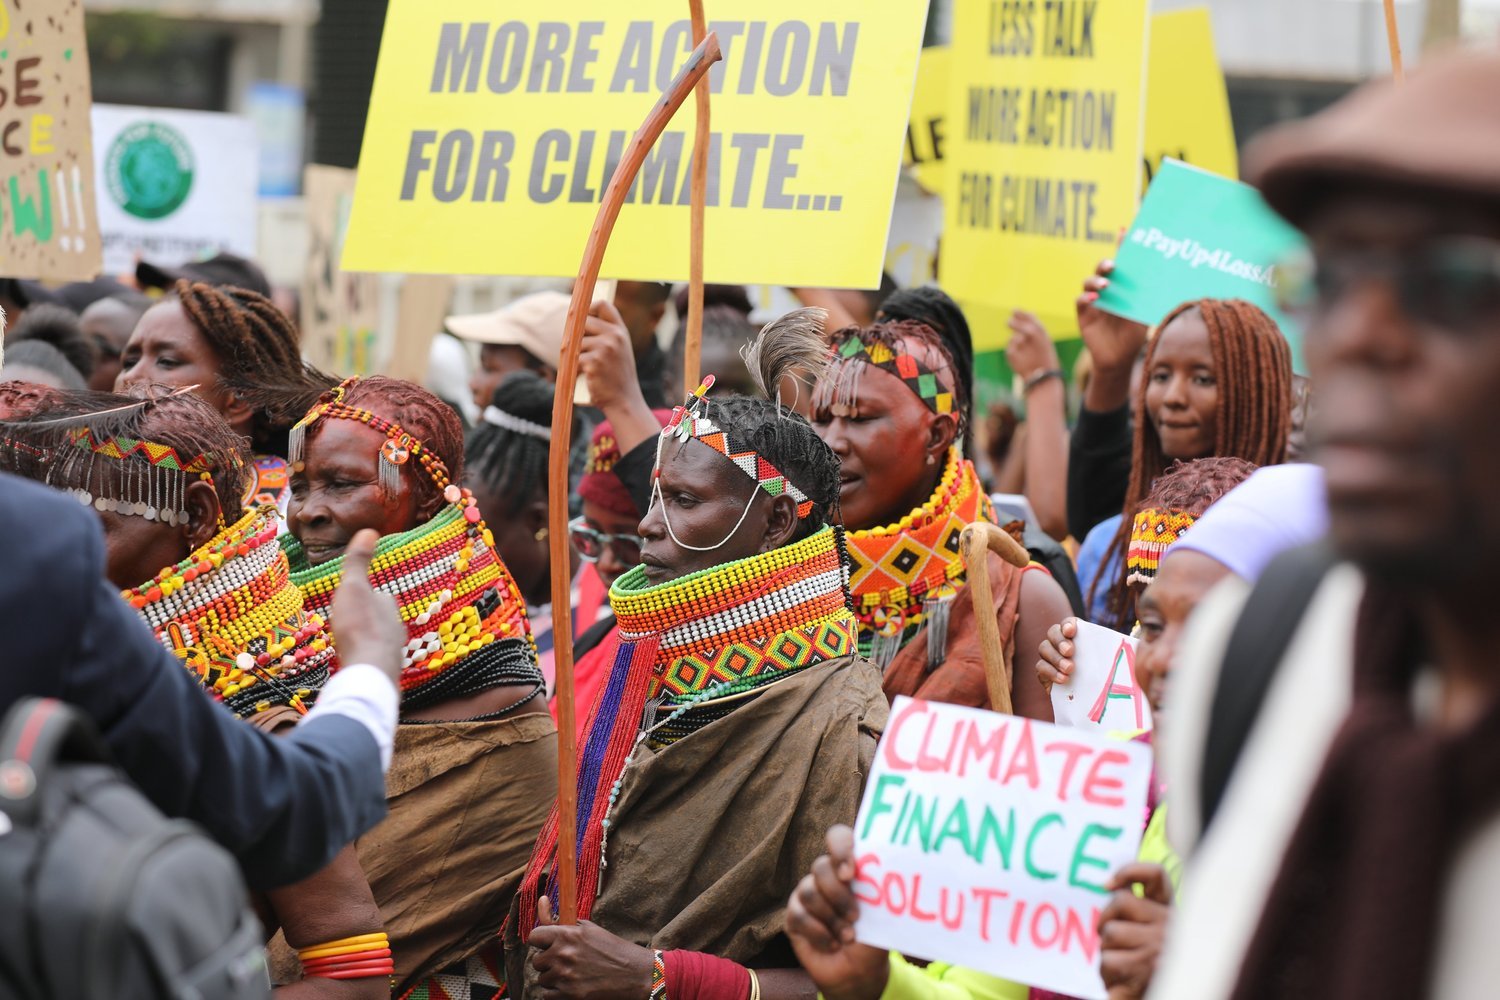 Celebrating International Women’s Day with Their Tremendous Contribution to Climate Justice